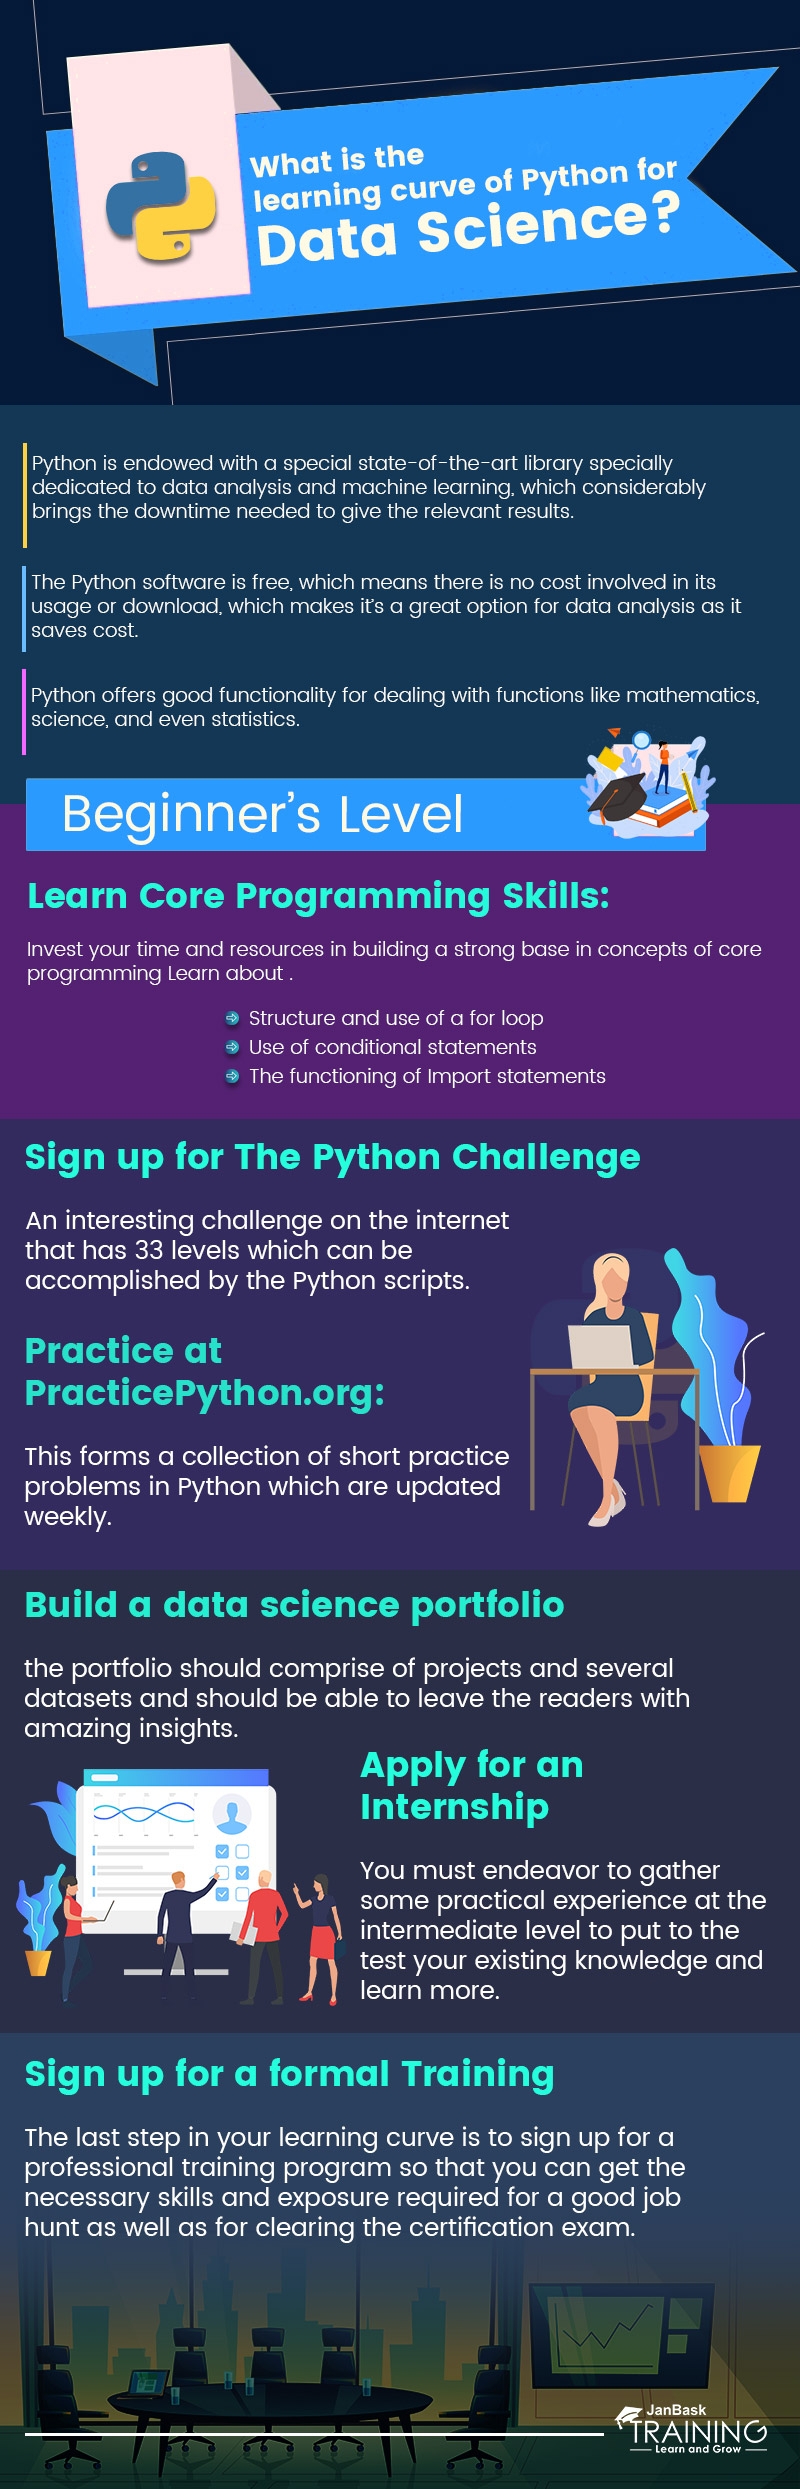 What is the learning curve of Python for Data Science?